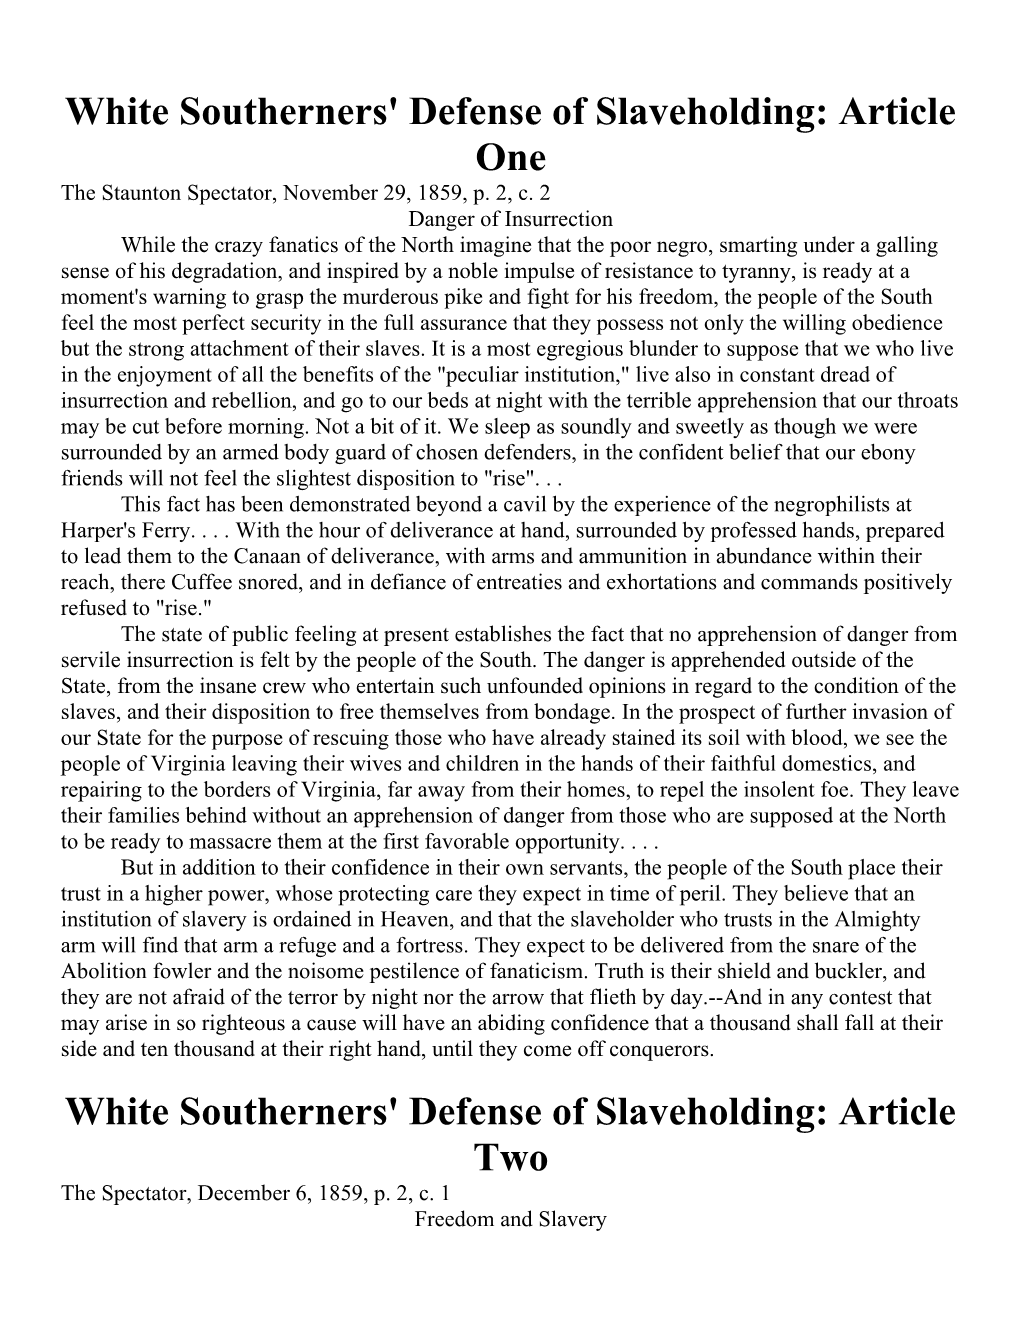 White Southerners' Defense of Slaveholding: Article One